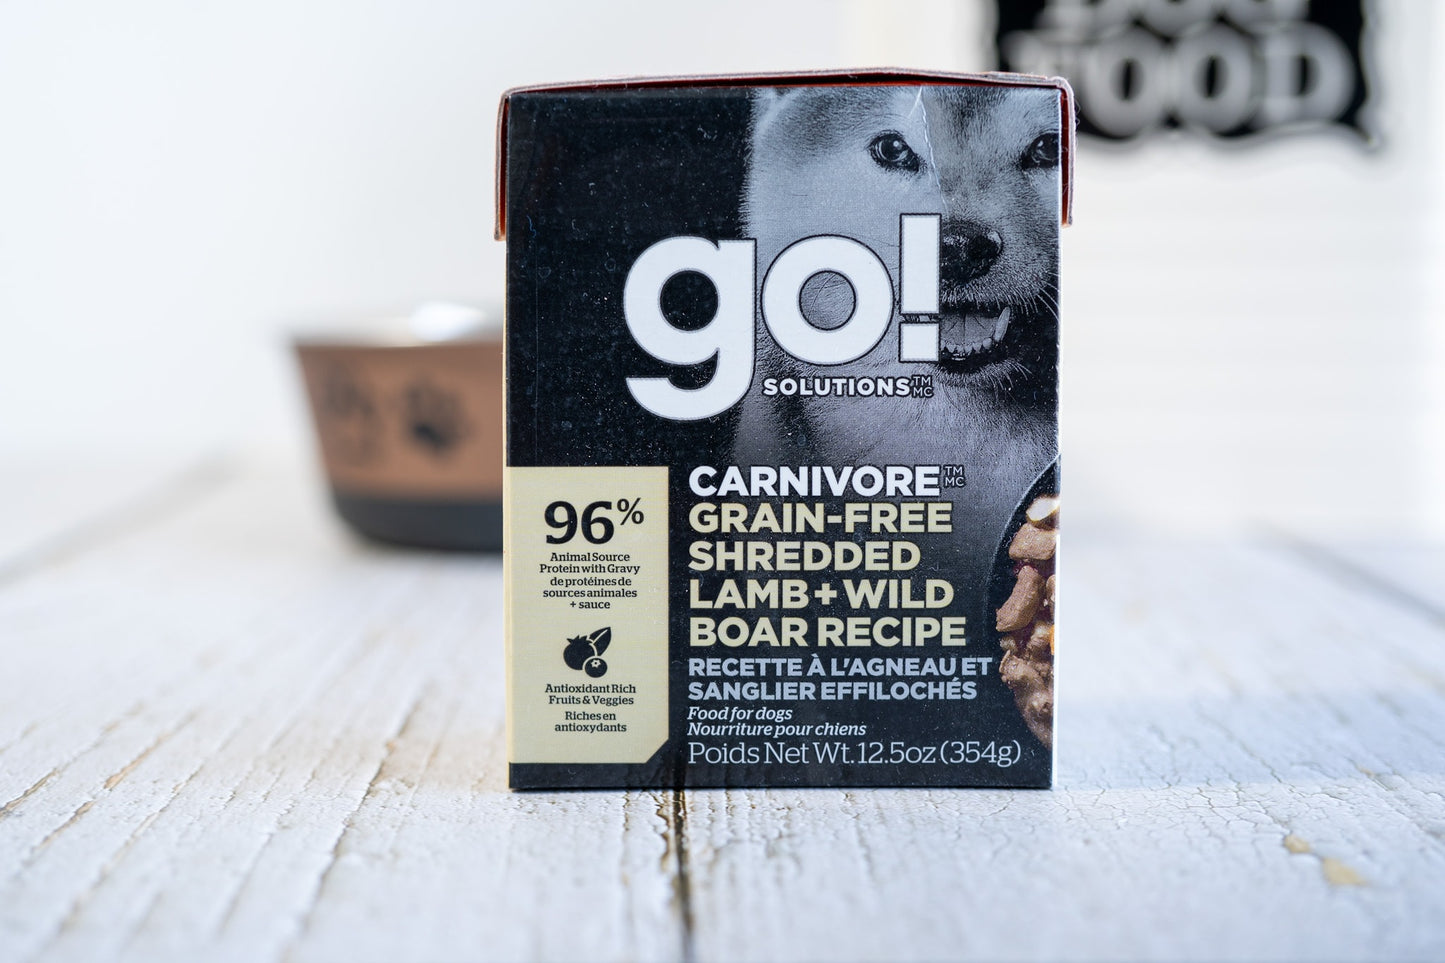 Shredded lamb and wild boar pâté for dogs from Go Solutions!